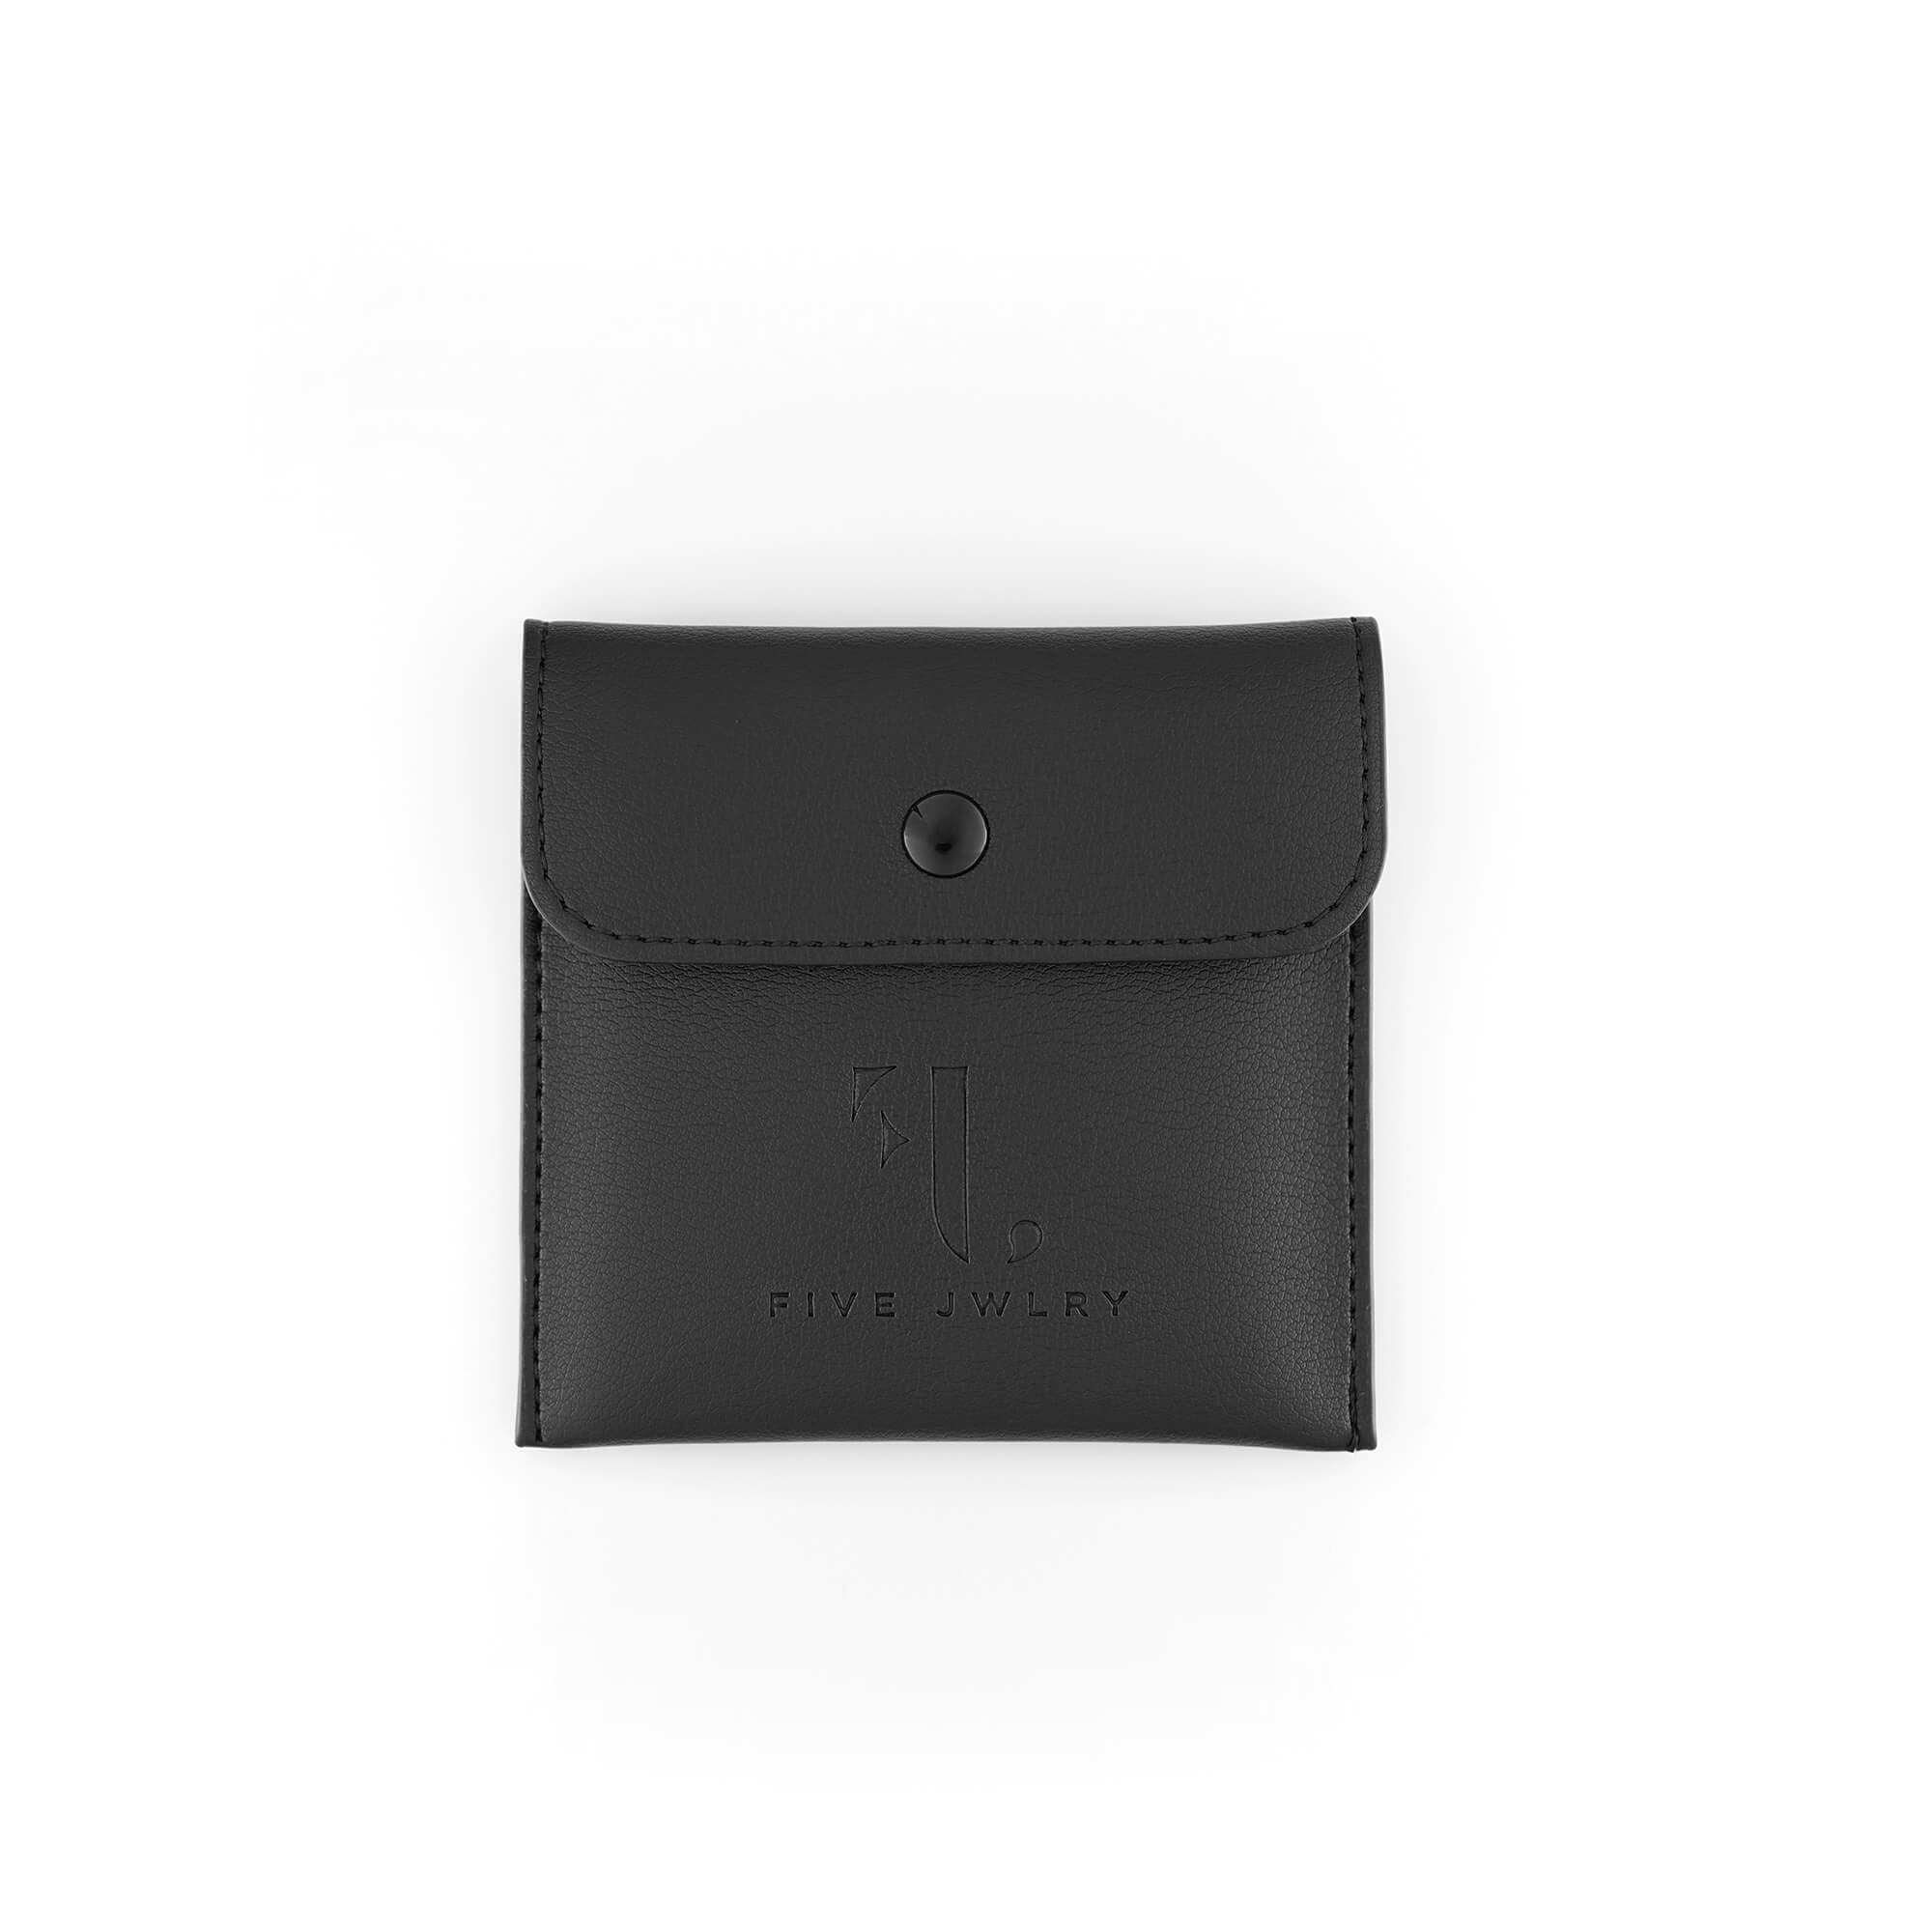 Five Jwlry black leather bag, designed to store and protect your jewelry. Crafted from high-quality leather, ensuring your precious pieces are kept safe and secure.